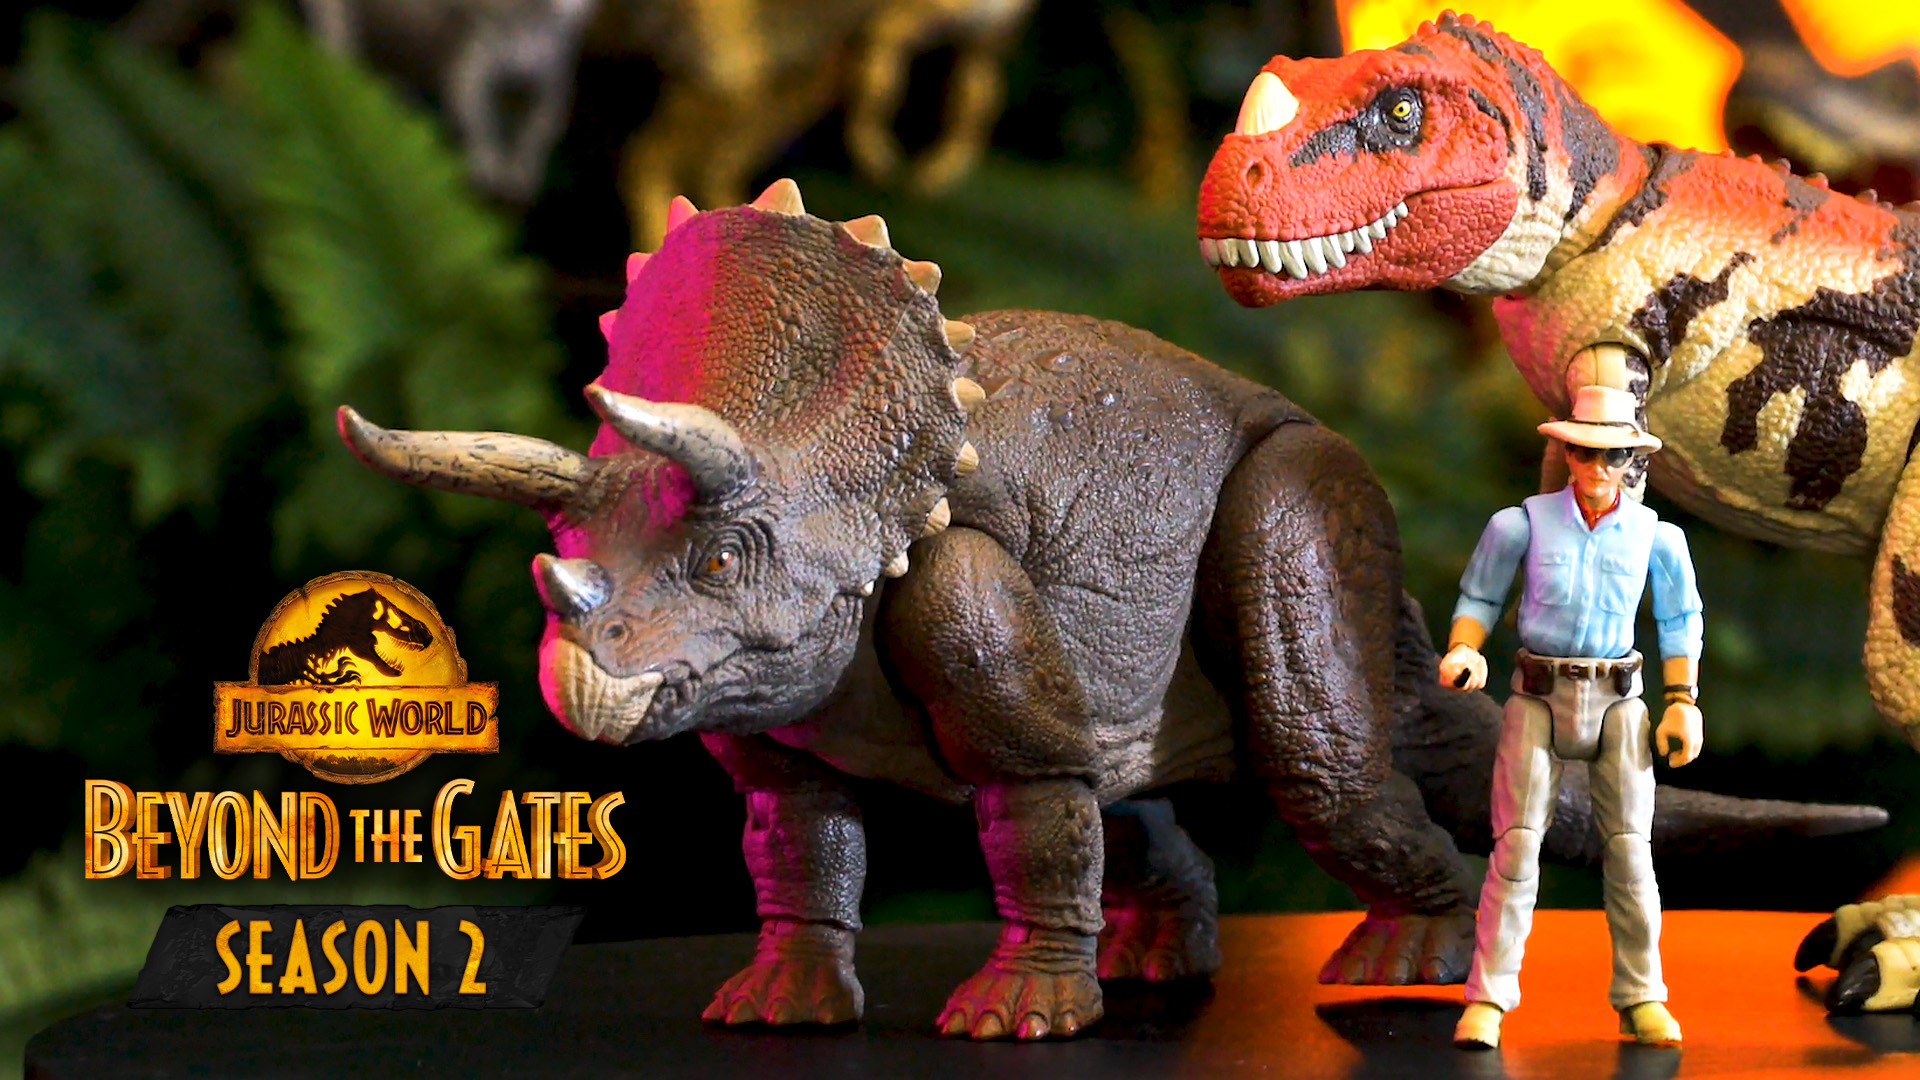 New Hammond Collection Drops in Beyond The Gates Episode 5: Dr. Alan Grant, Ceratosaurus & Triceratops